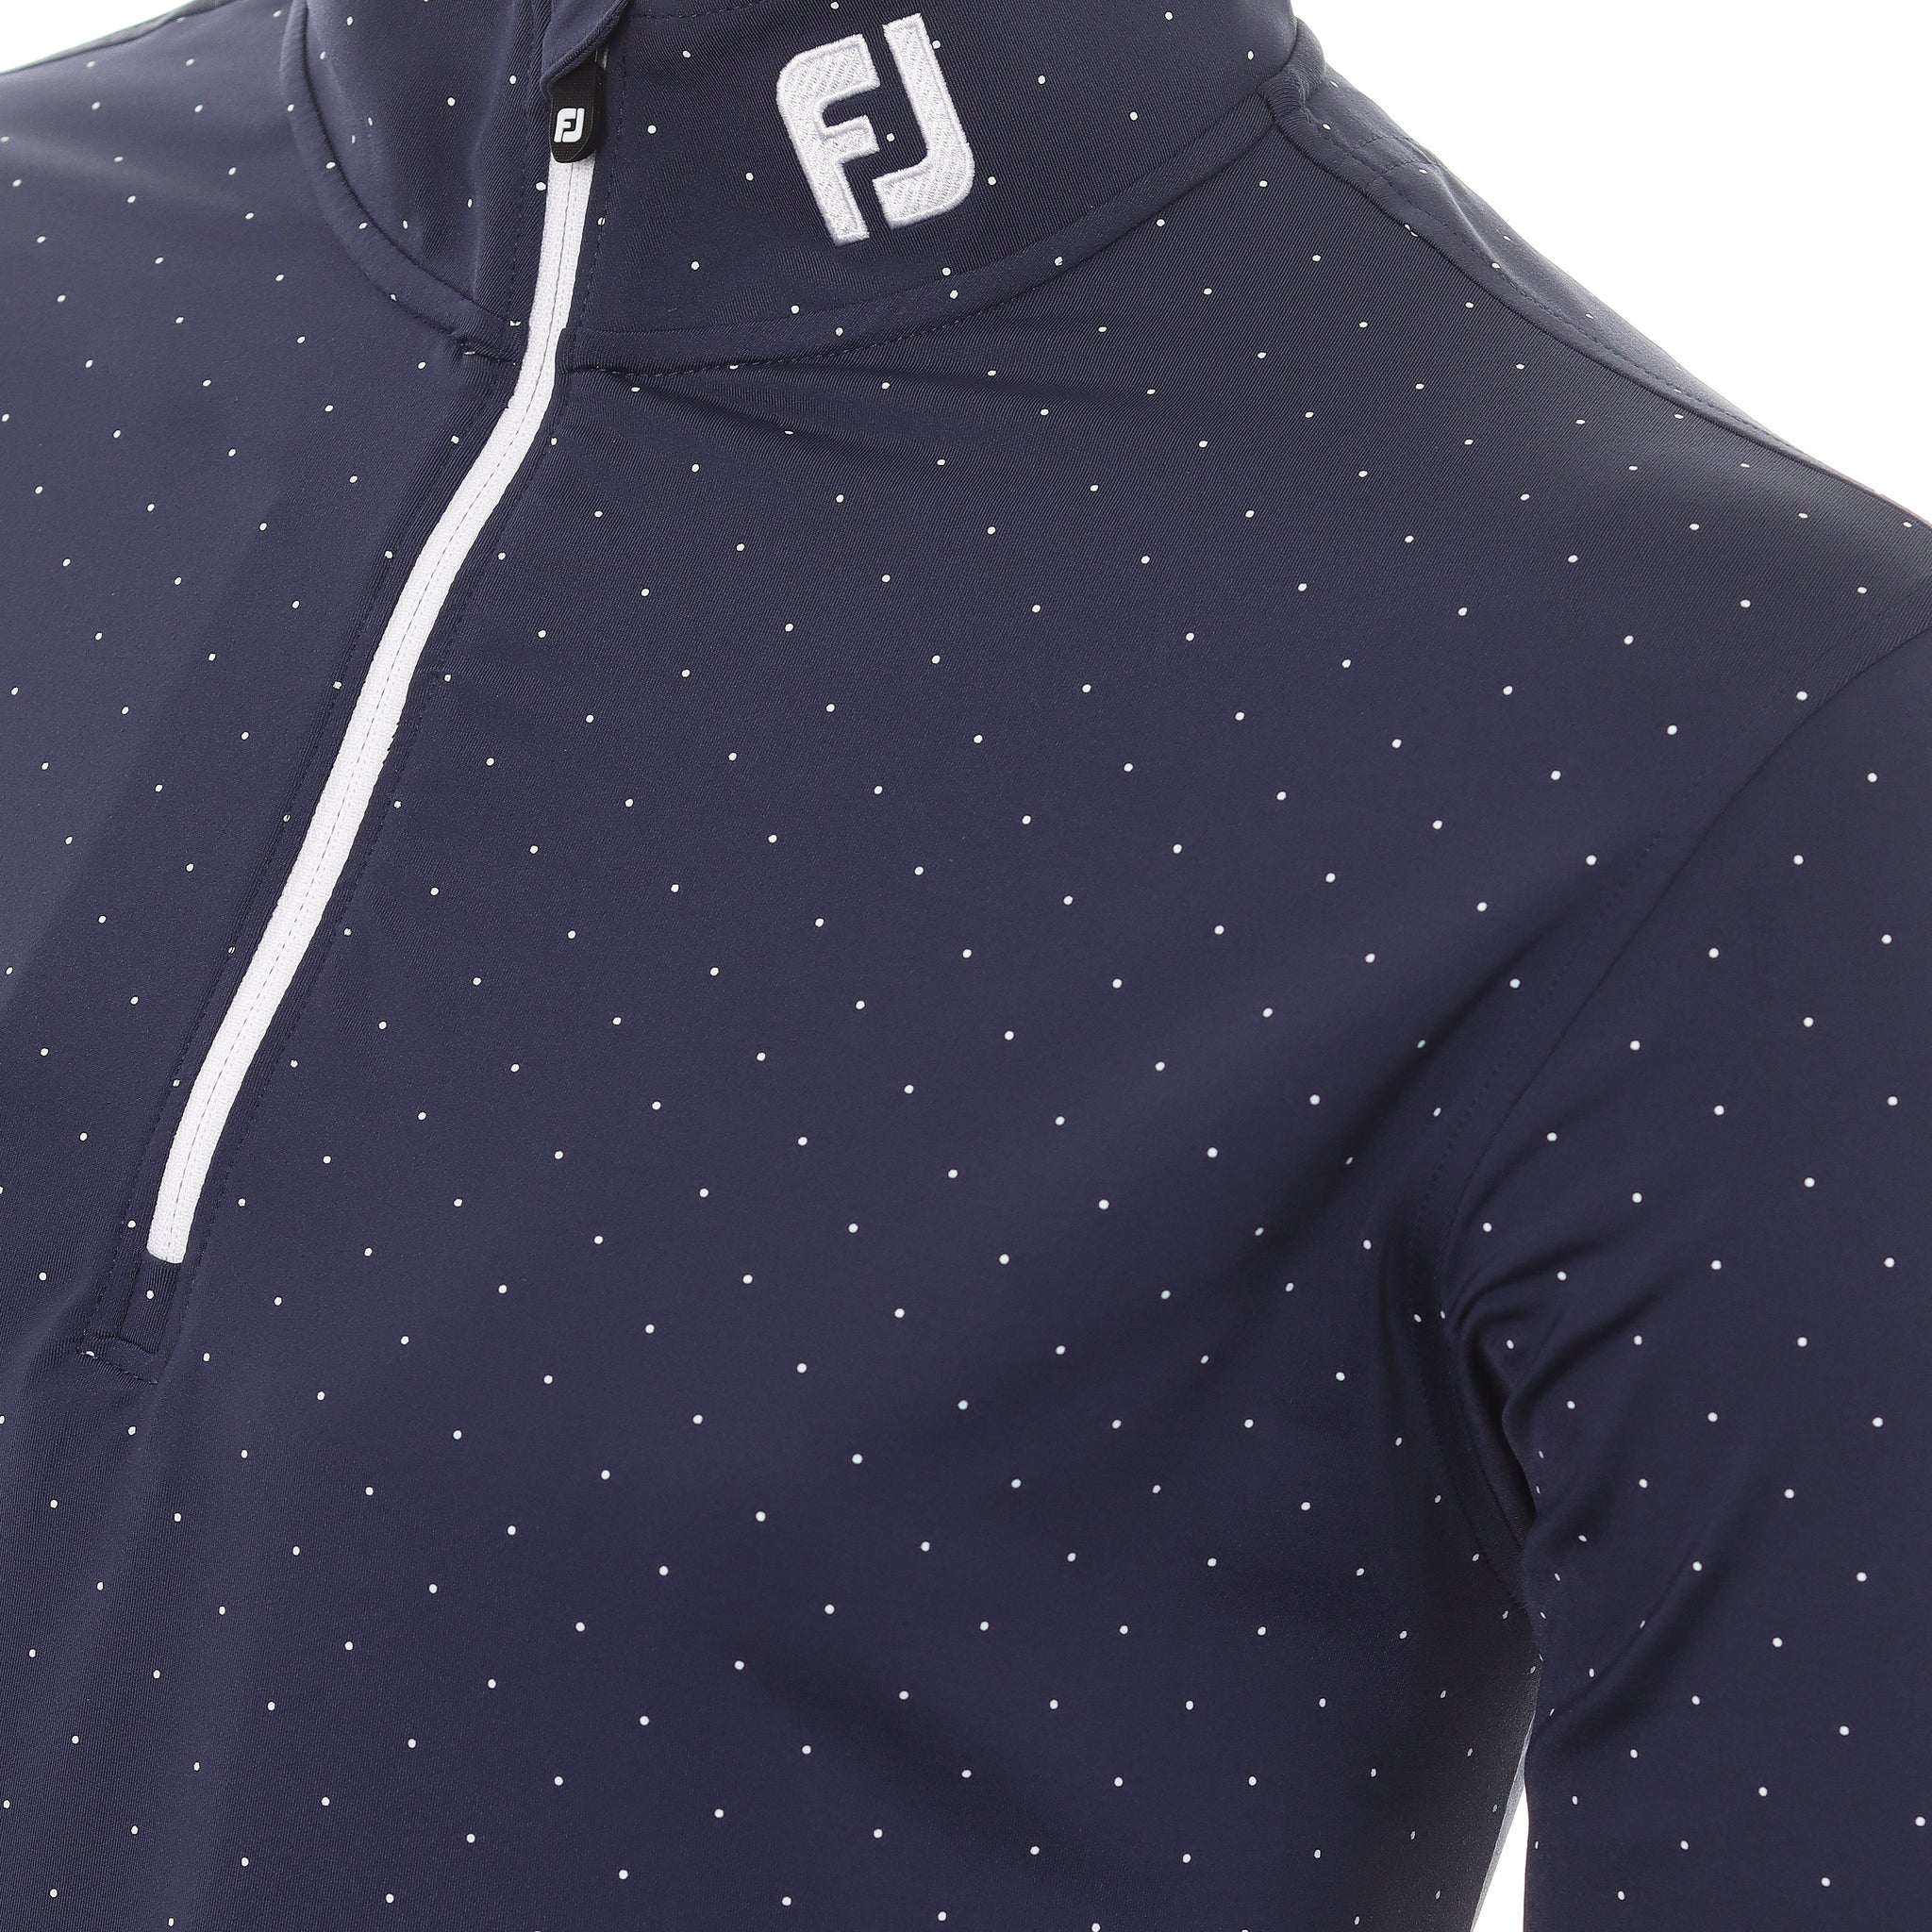 FootJoy Pin Dot Chill Out Pullover